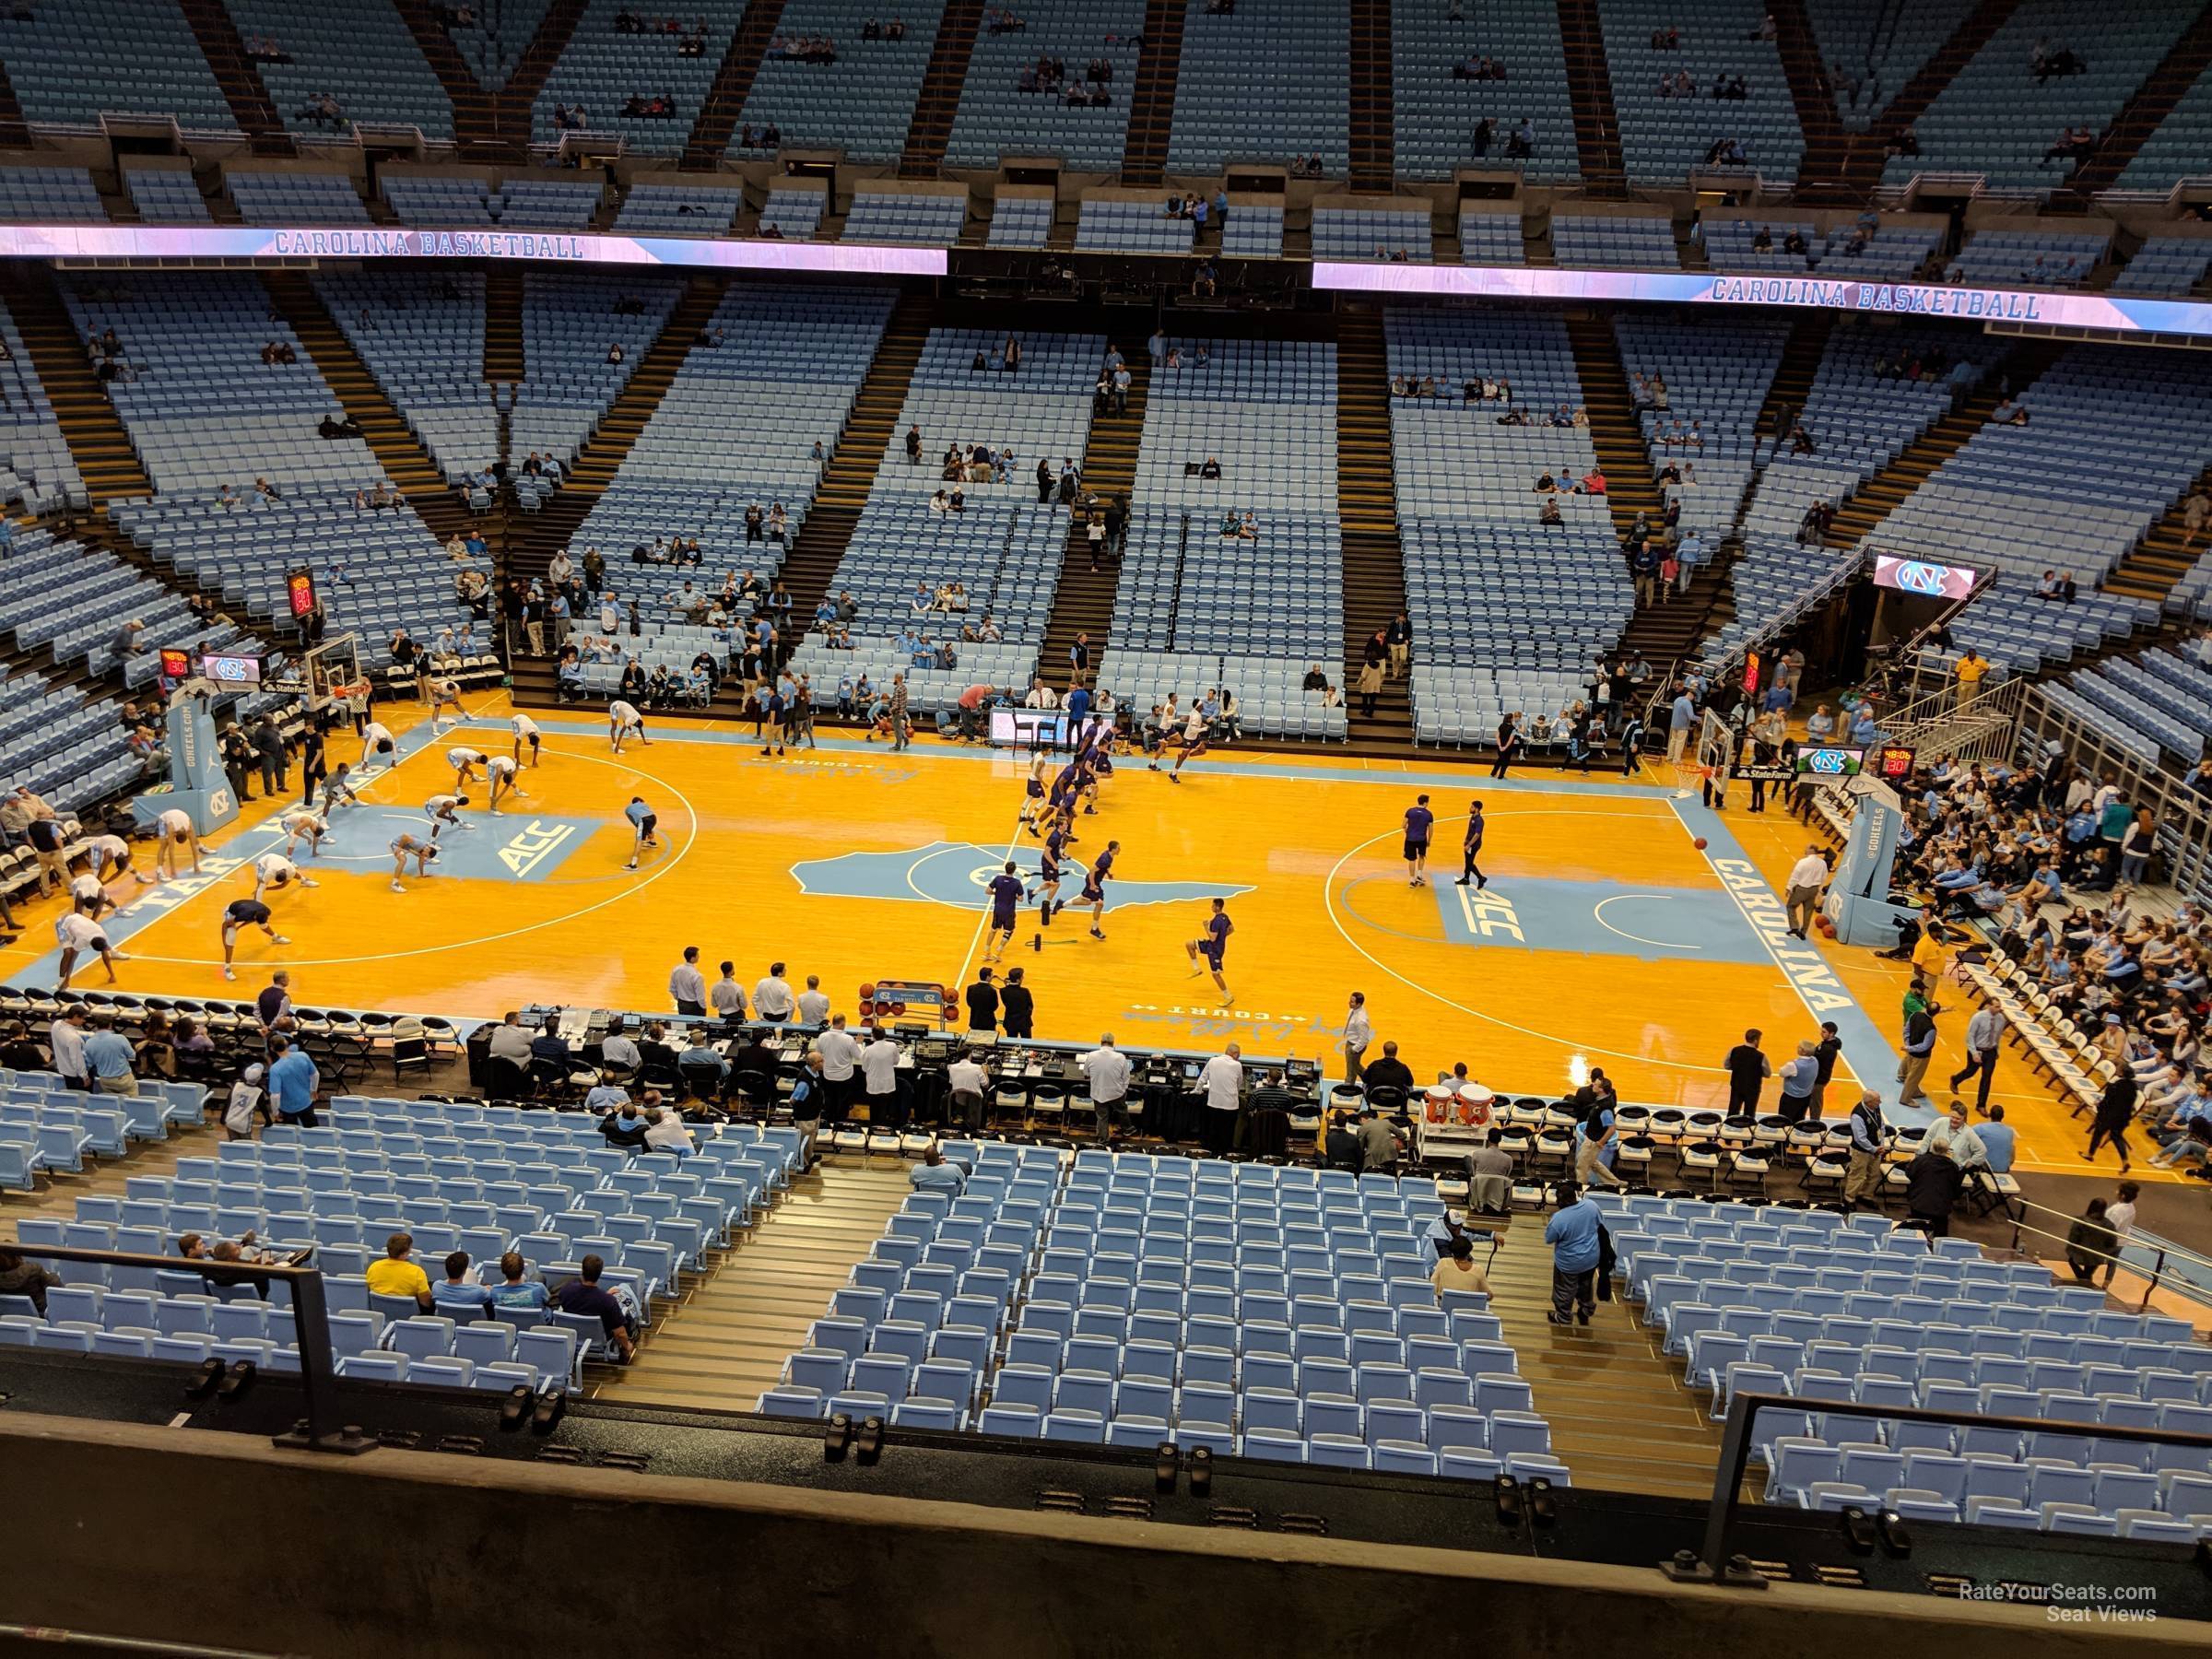 section 209, row c seat view  - dean smith center